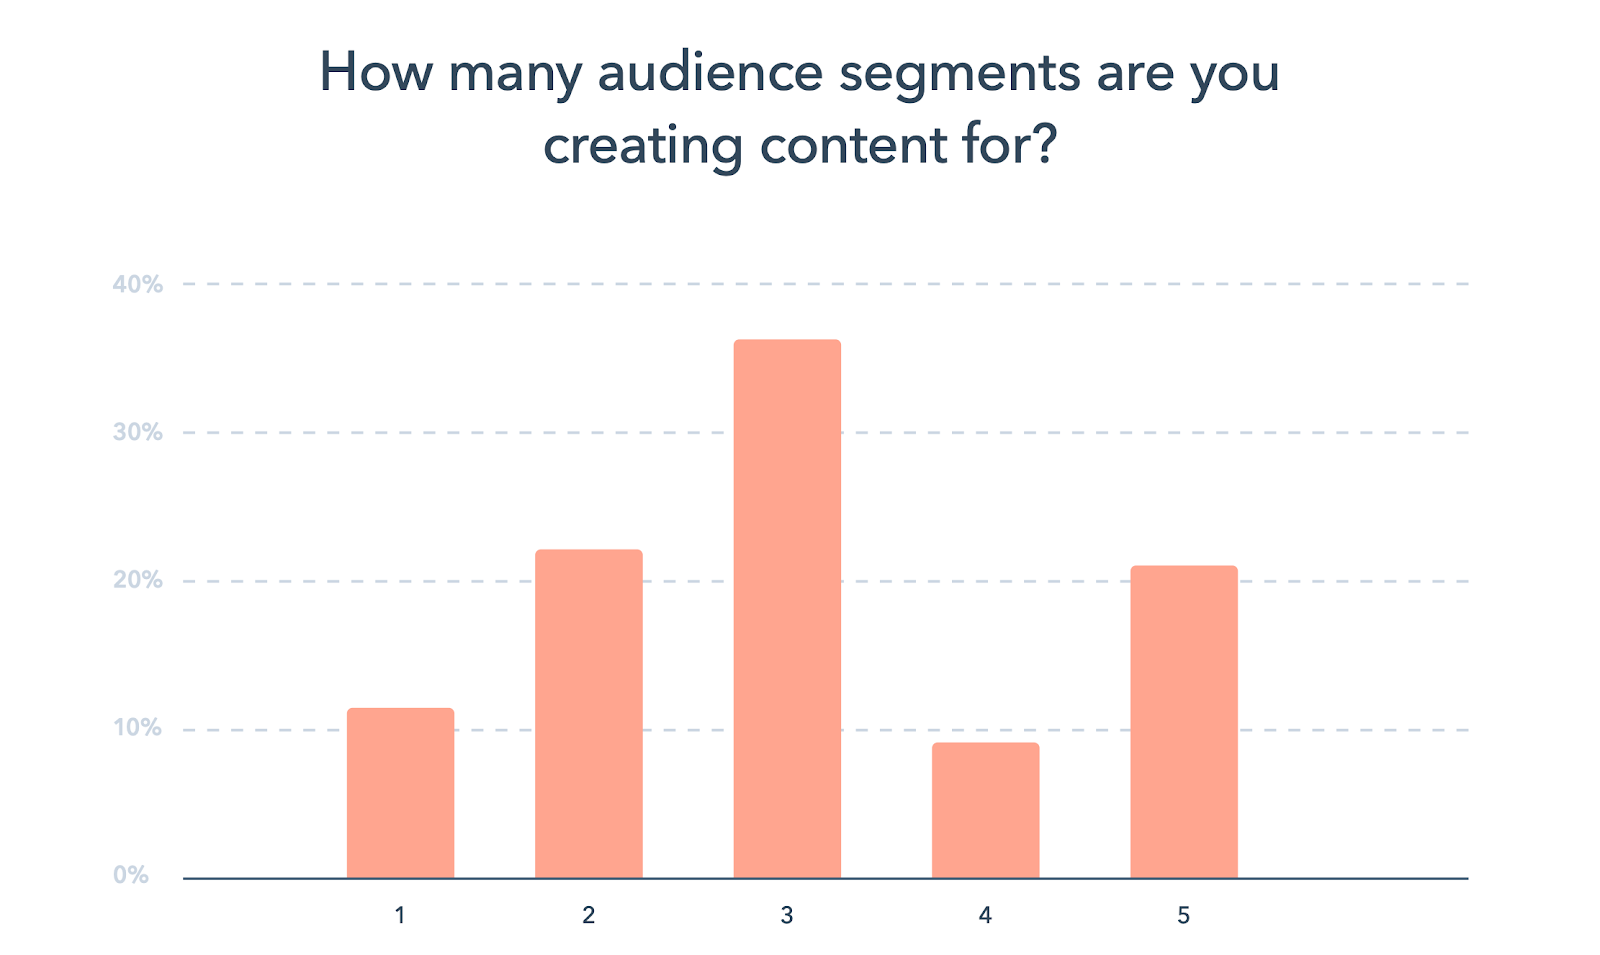 Chart showing average number of audience segments